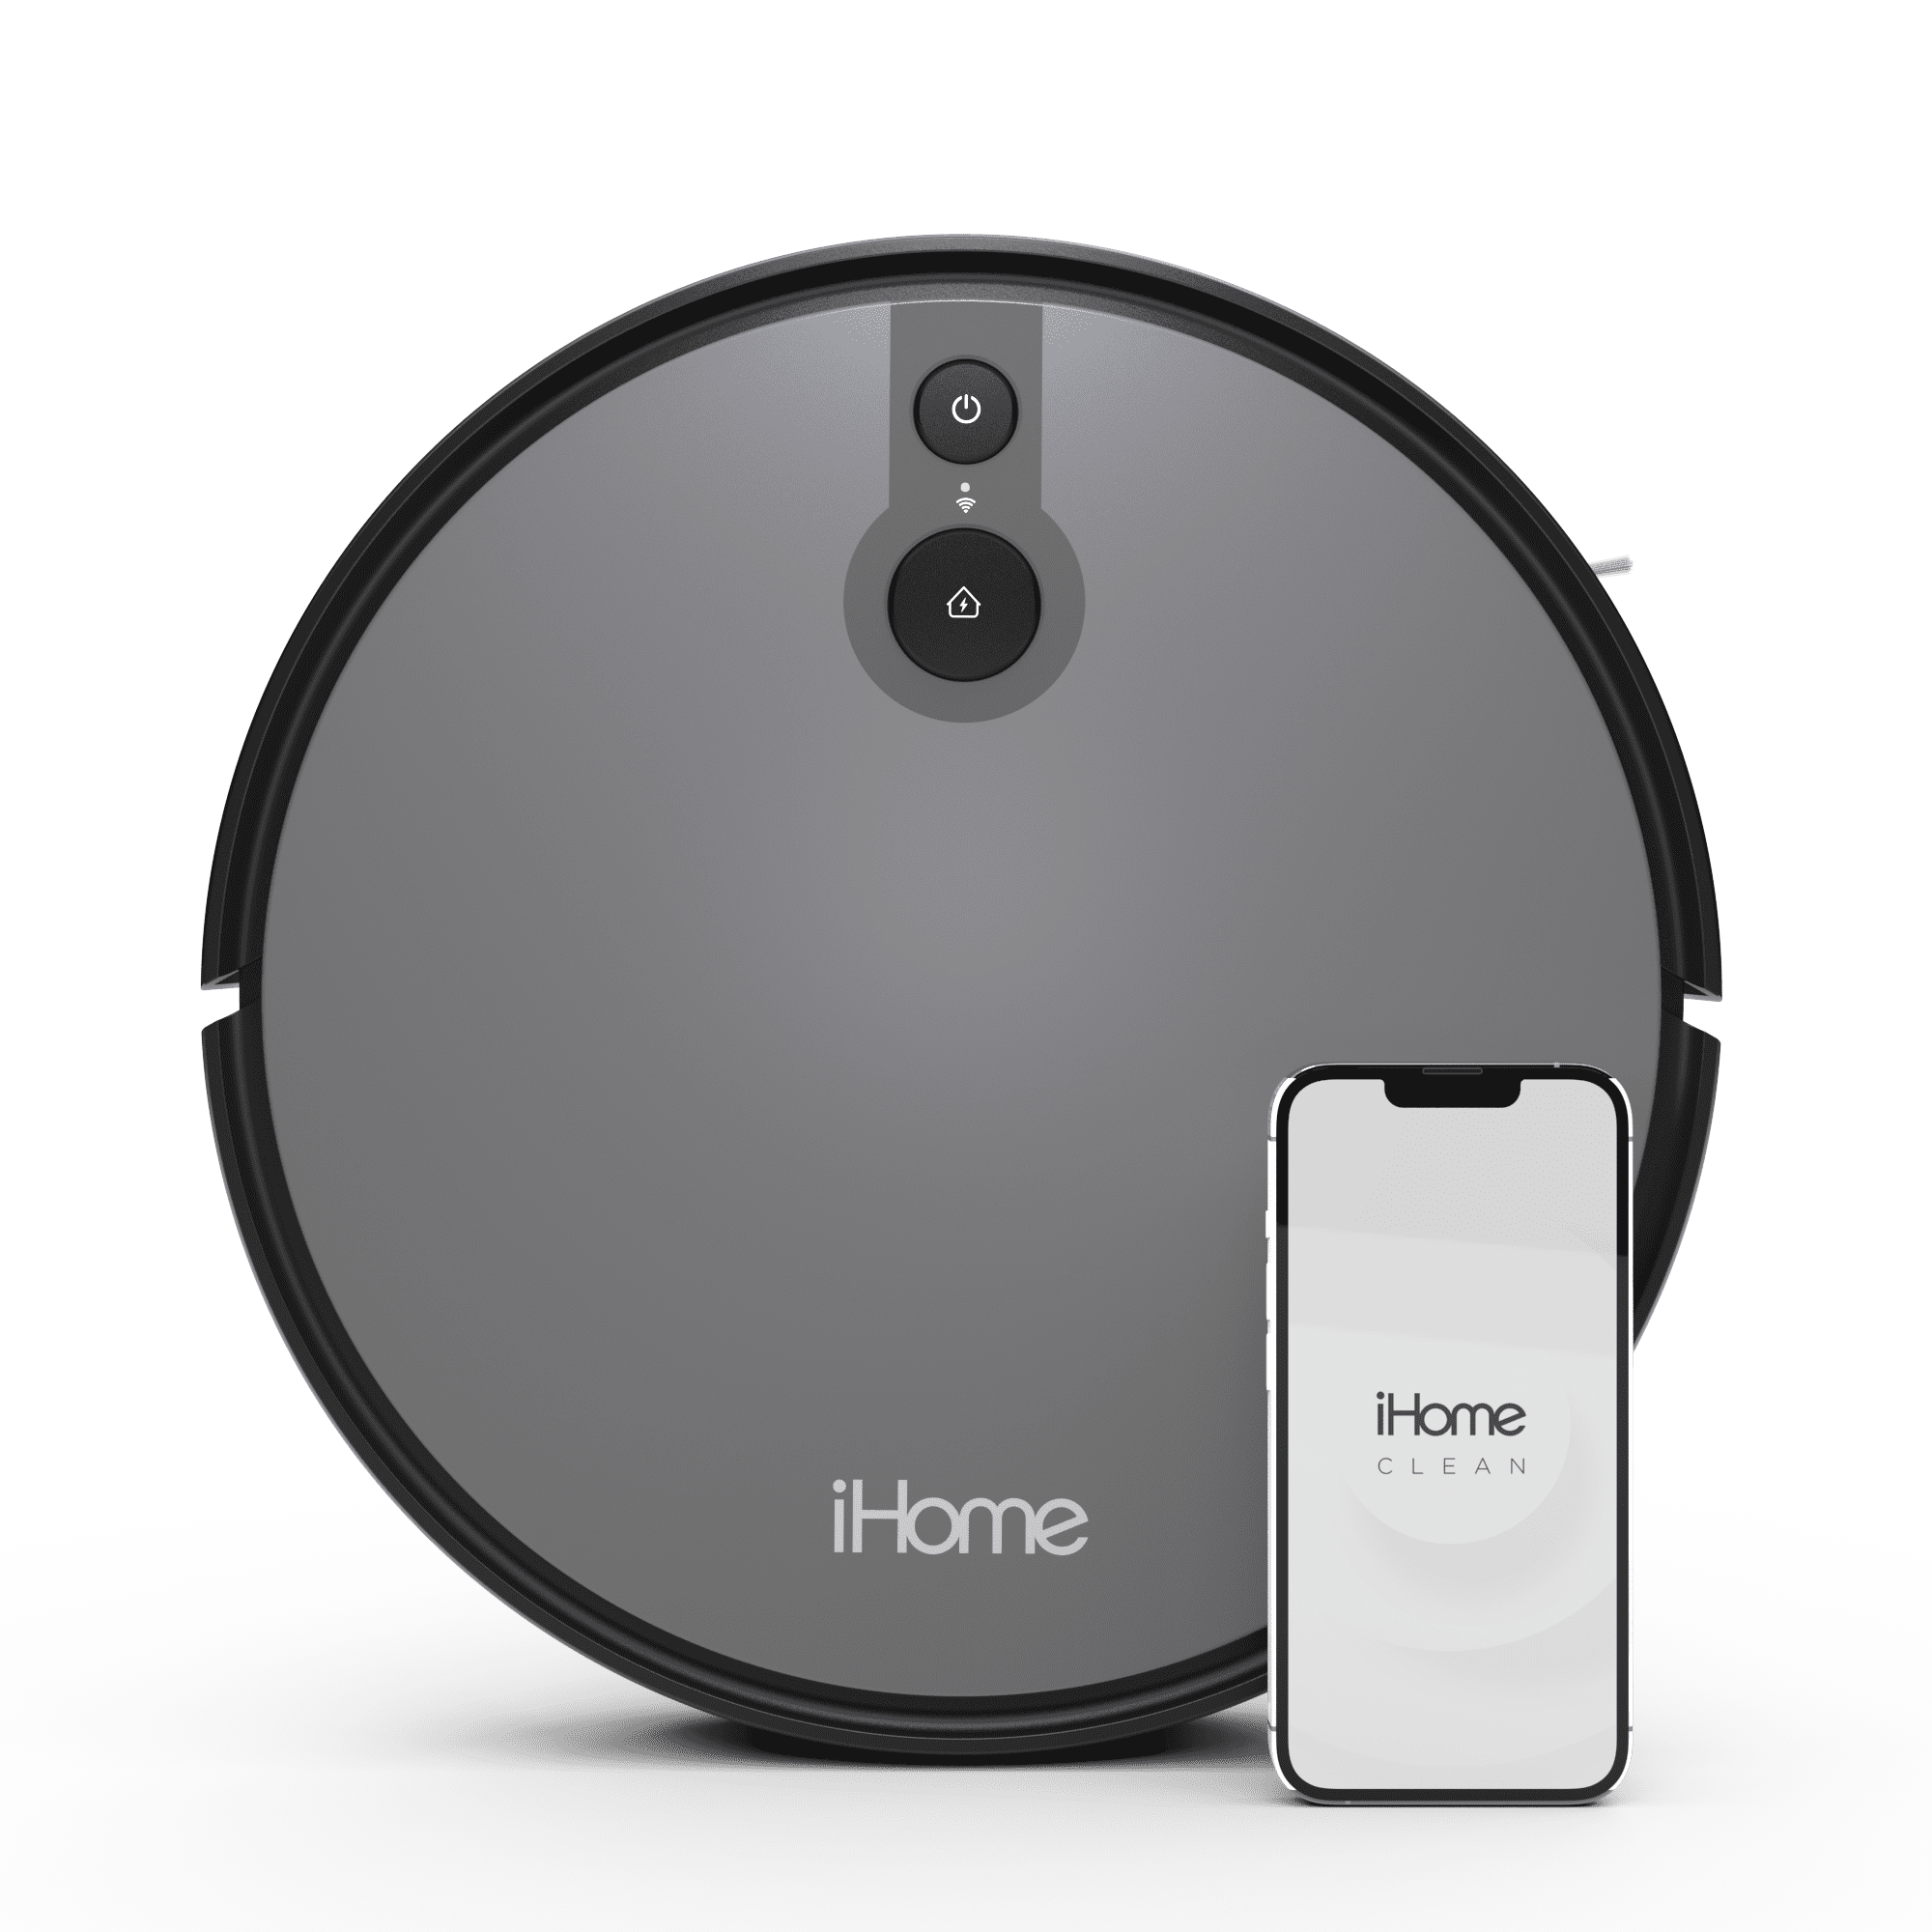 iHome AutoVac Juno Robot Vacuum with Mapping Technology, 2000pa Strong Suction Power, 100 Minute Runtime, App Connectivity